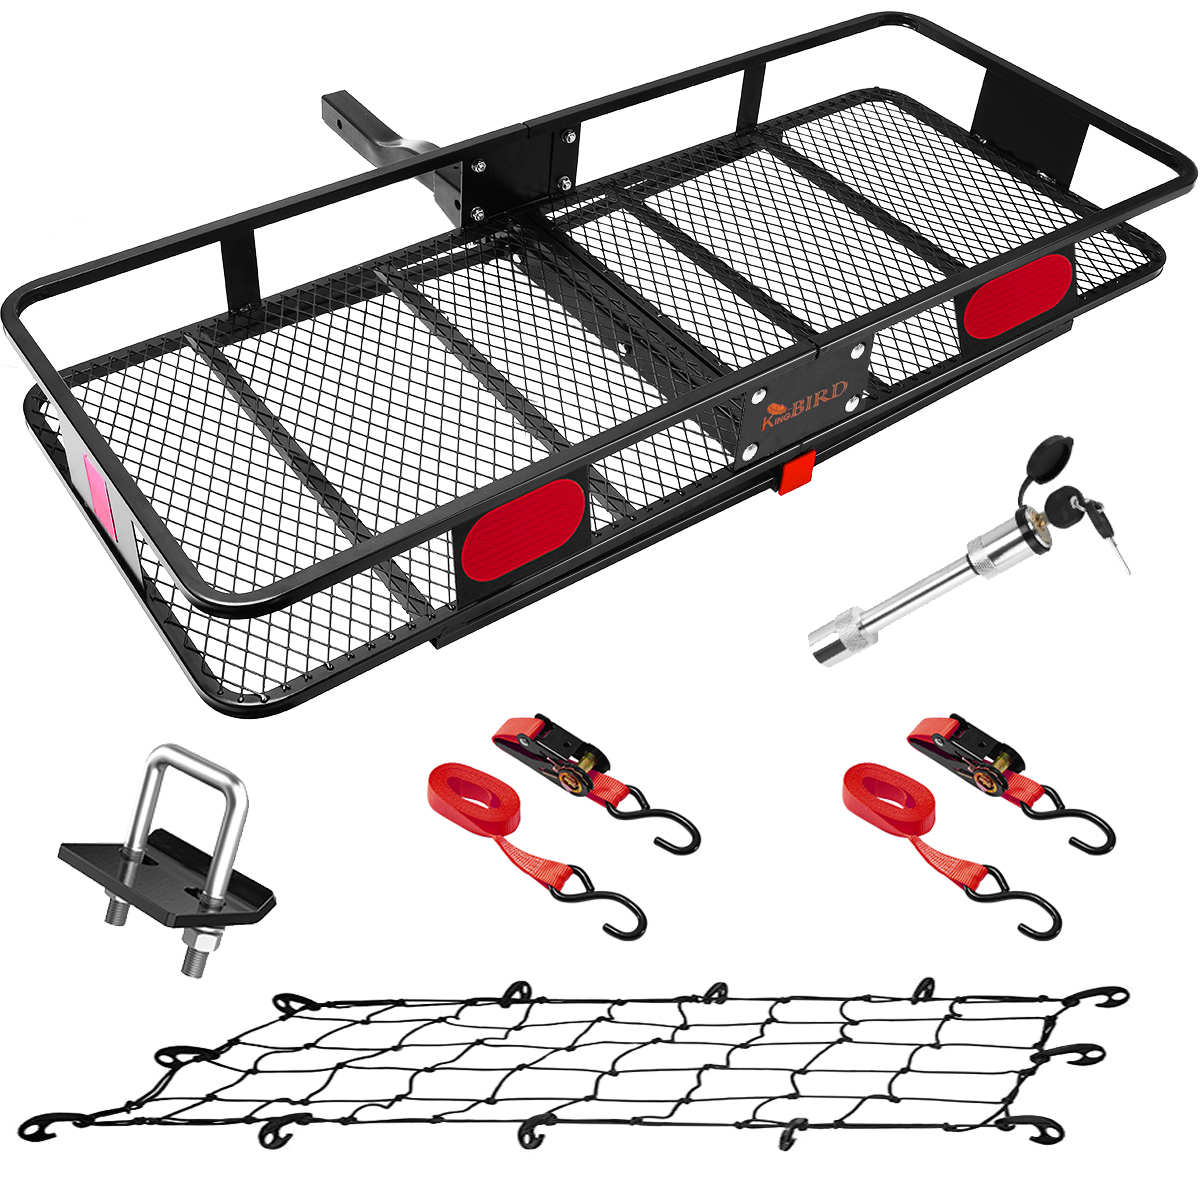 MeeFar Folding Hitch Mount Rack 60” X 20 X 6''Cargo Carrier Basket 20 Cubic  Feet Waterproof Cargo Storage Bag Fit All Car SUV Truck Picup With  Trailer Hitch Receiver